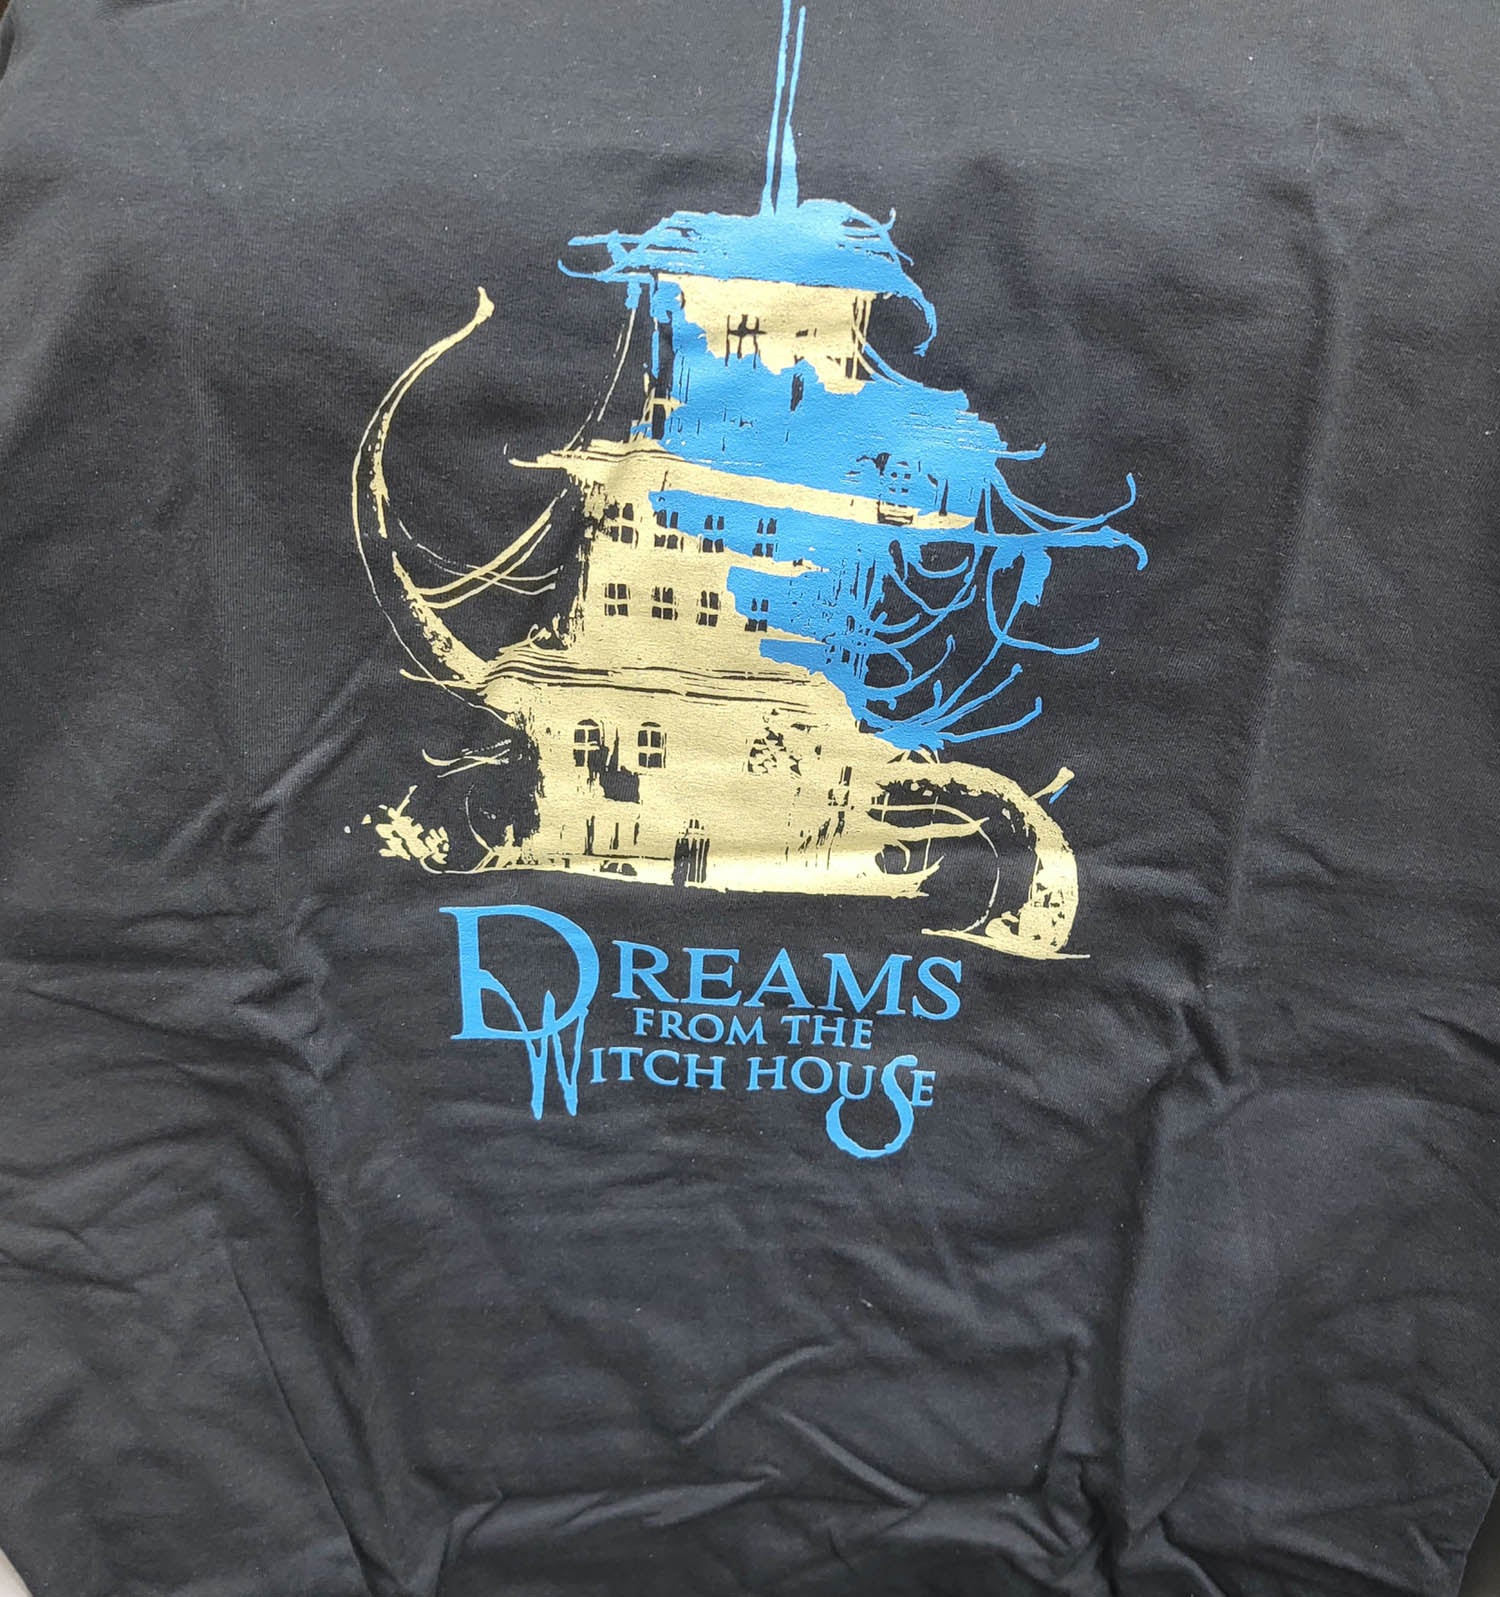 Dreams from the Witch House Black T-Shirts Included at Random in Black Friday Sale Orders!